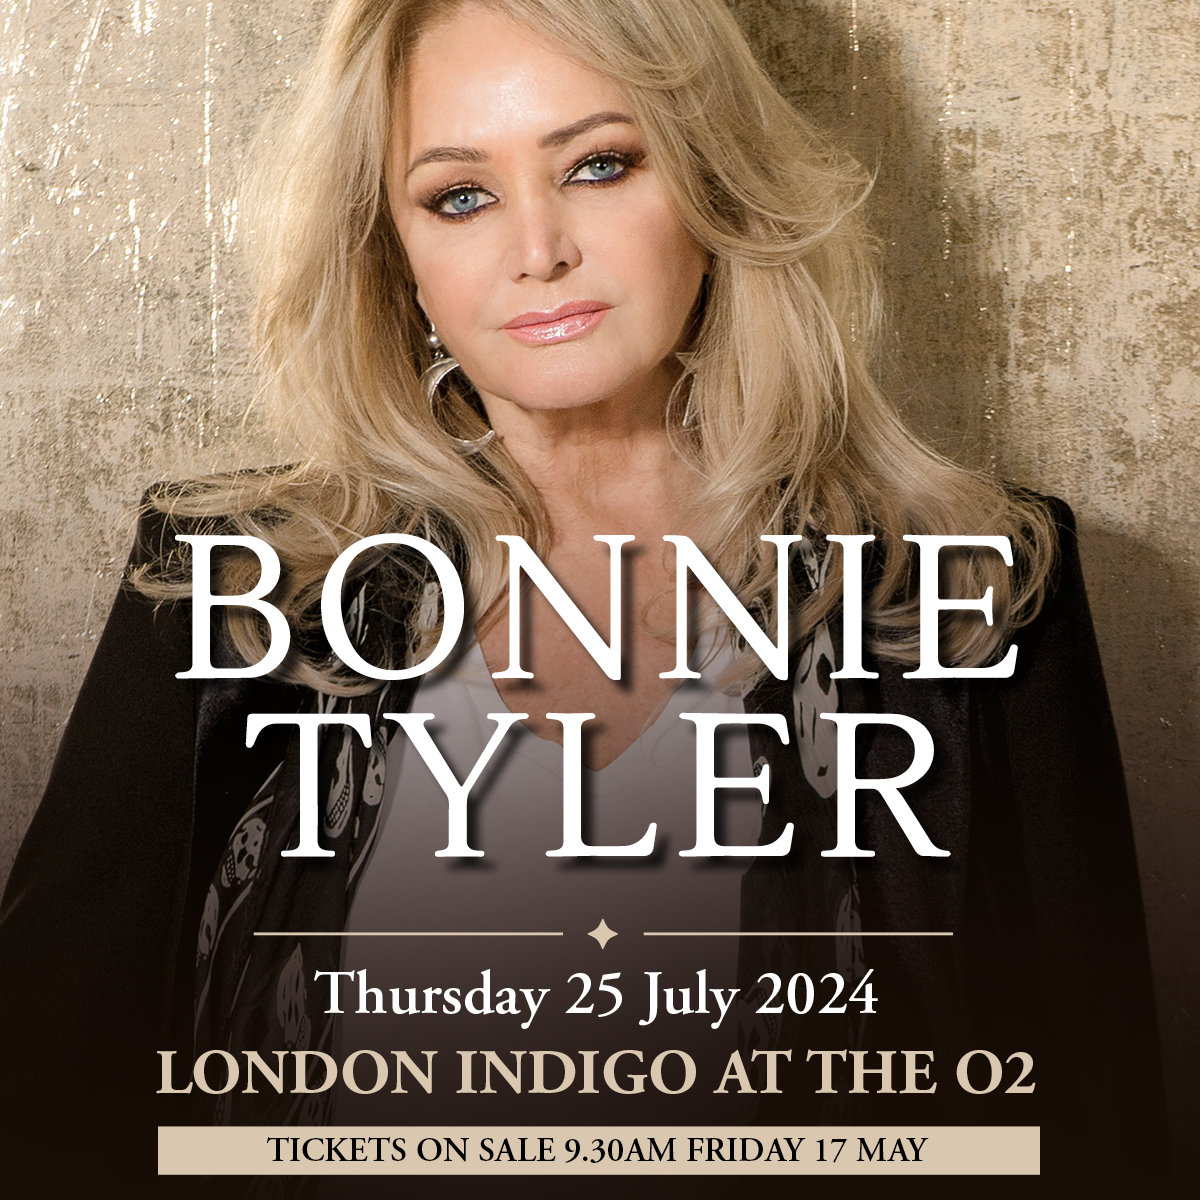 Vocal powerhouse Bonnie Tyler is taking the stage at London Indigo at The O2 on Thursday 25 July. Tickets on sale this Friday here > bit.ly/3UPLKLU